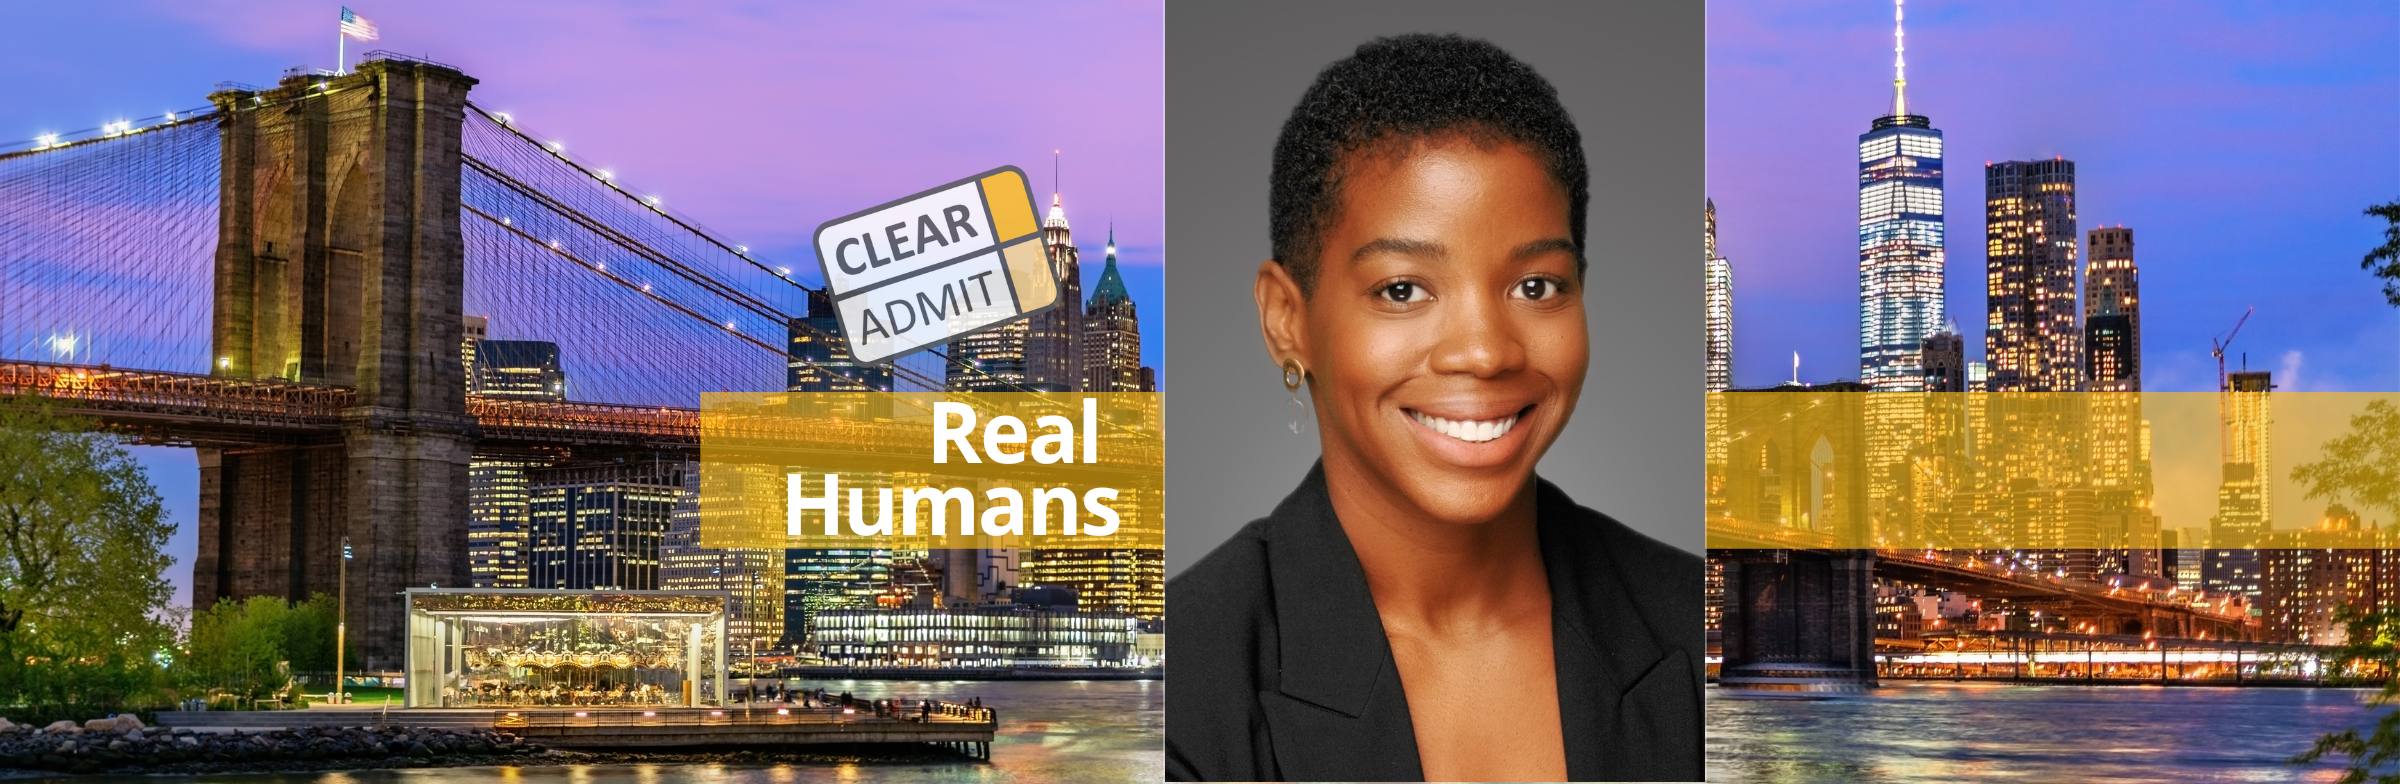 Image for Real Humans of Accenture: Whitney Jordan, NYU Stern Fashion & Luxury MBA ’22, Senior Strategy Consultant